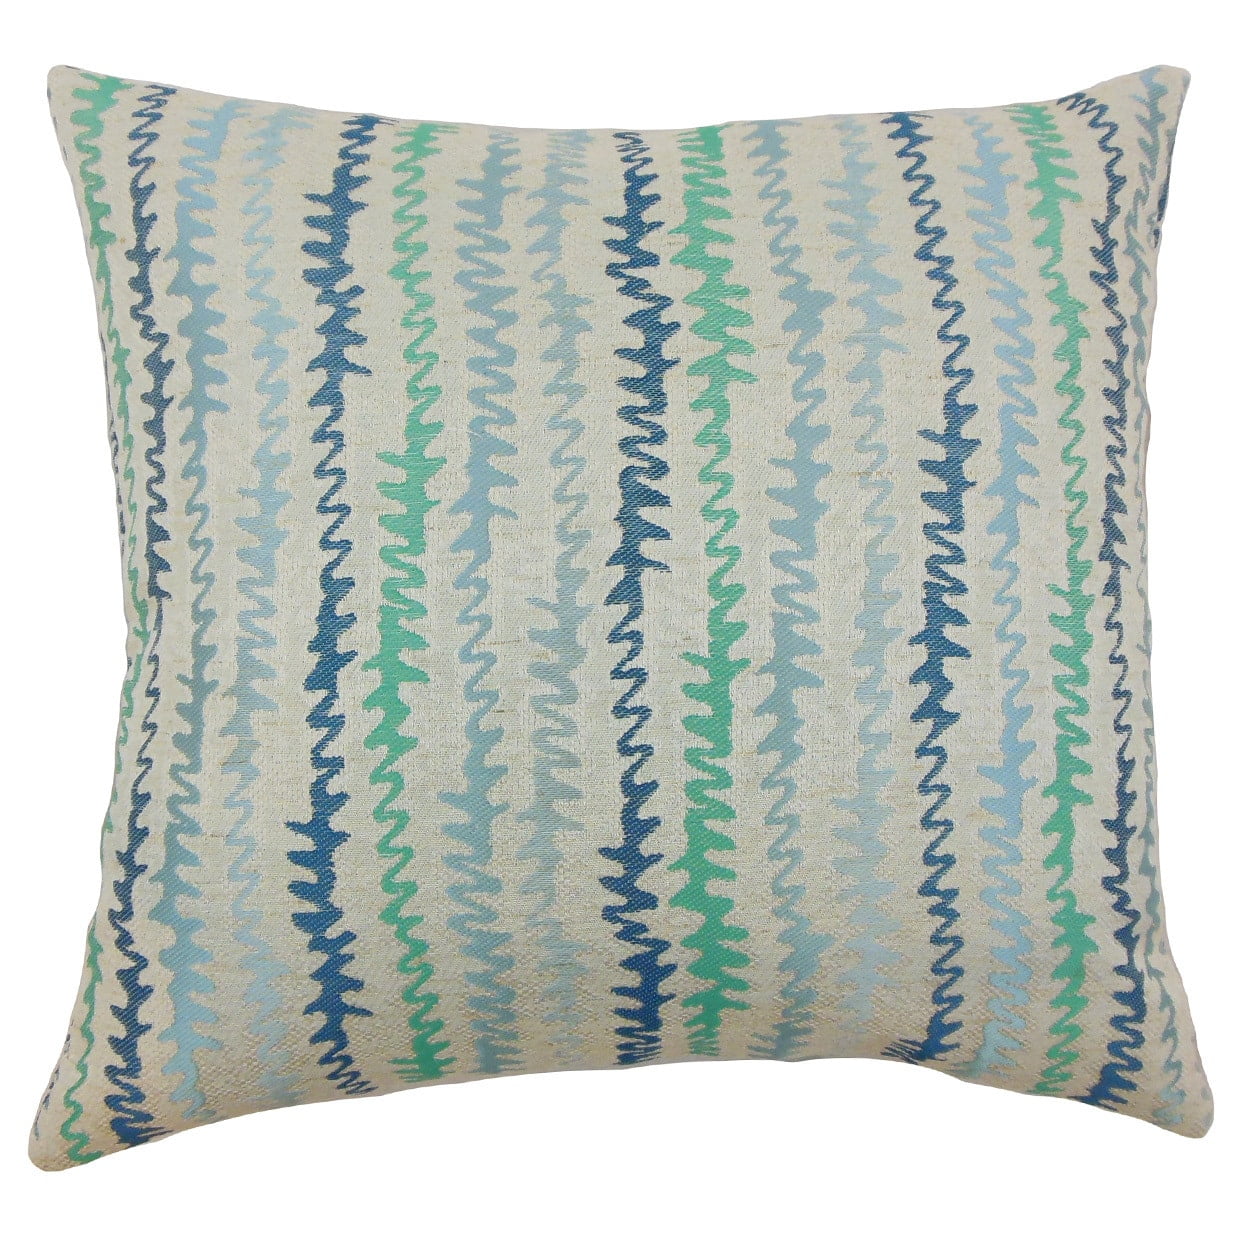 The Pillow Collection Malu Zigzag Bedding Sham Turquoise King/20 x 36 